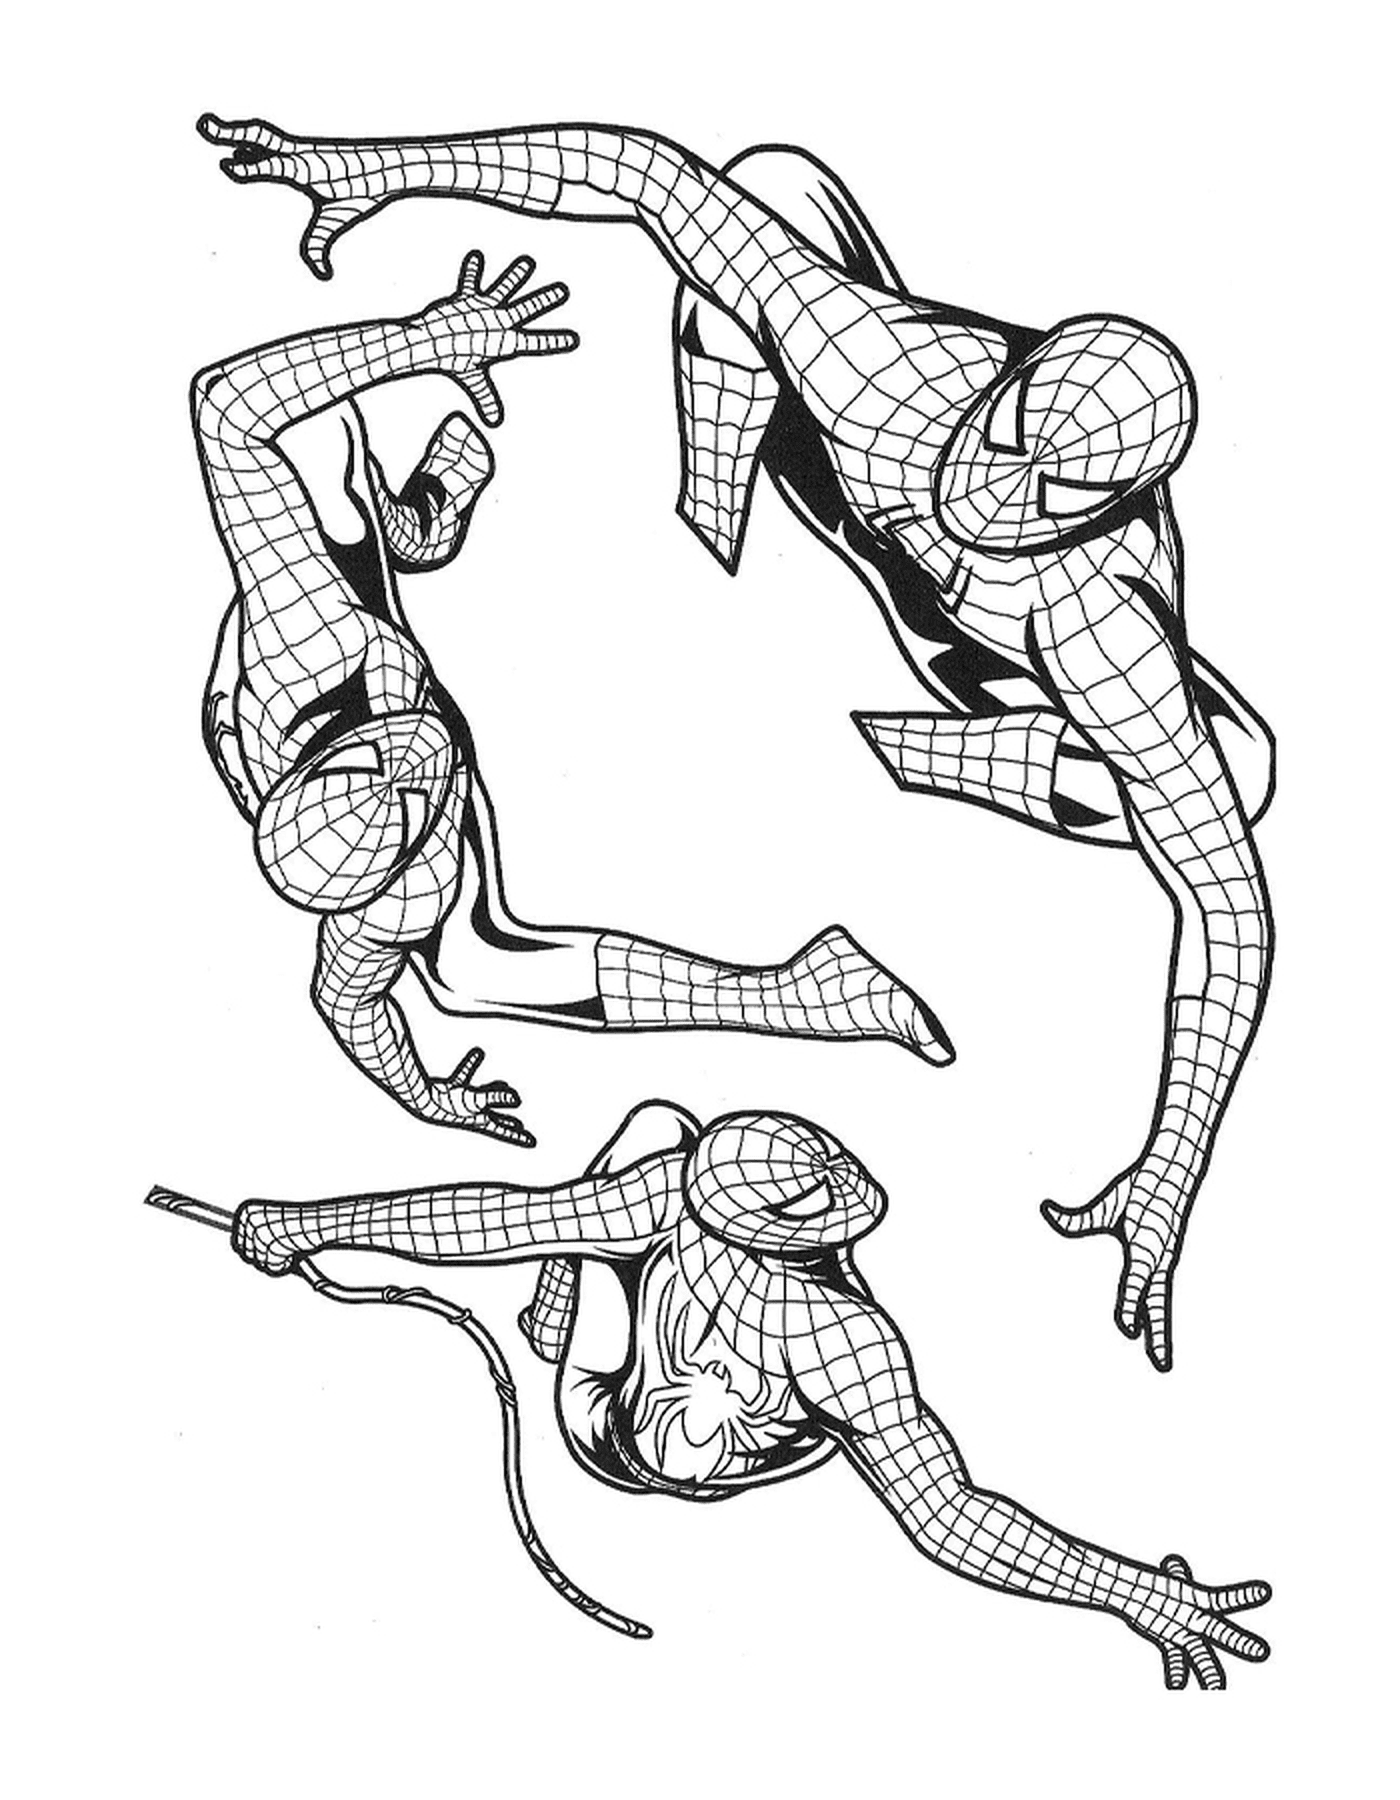  Set of three drawings in black and white by Spiderman 